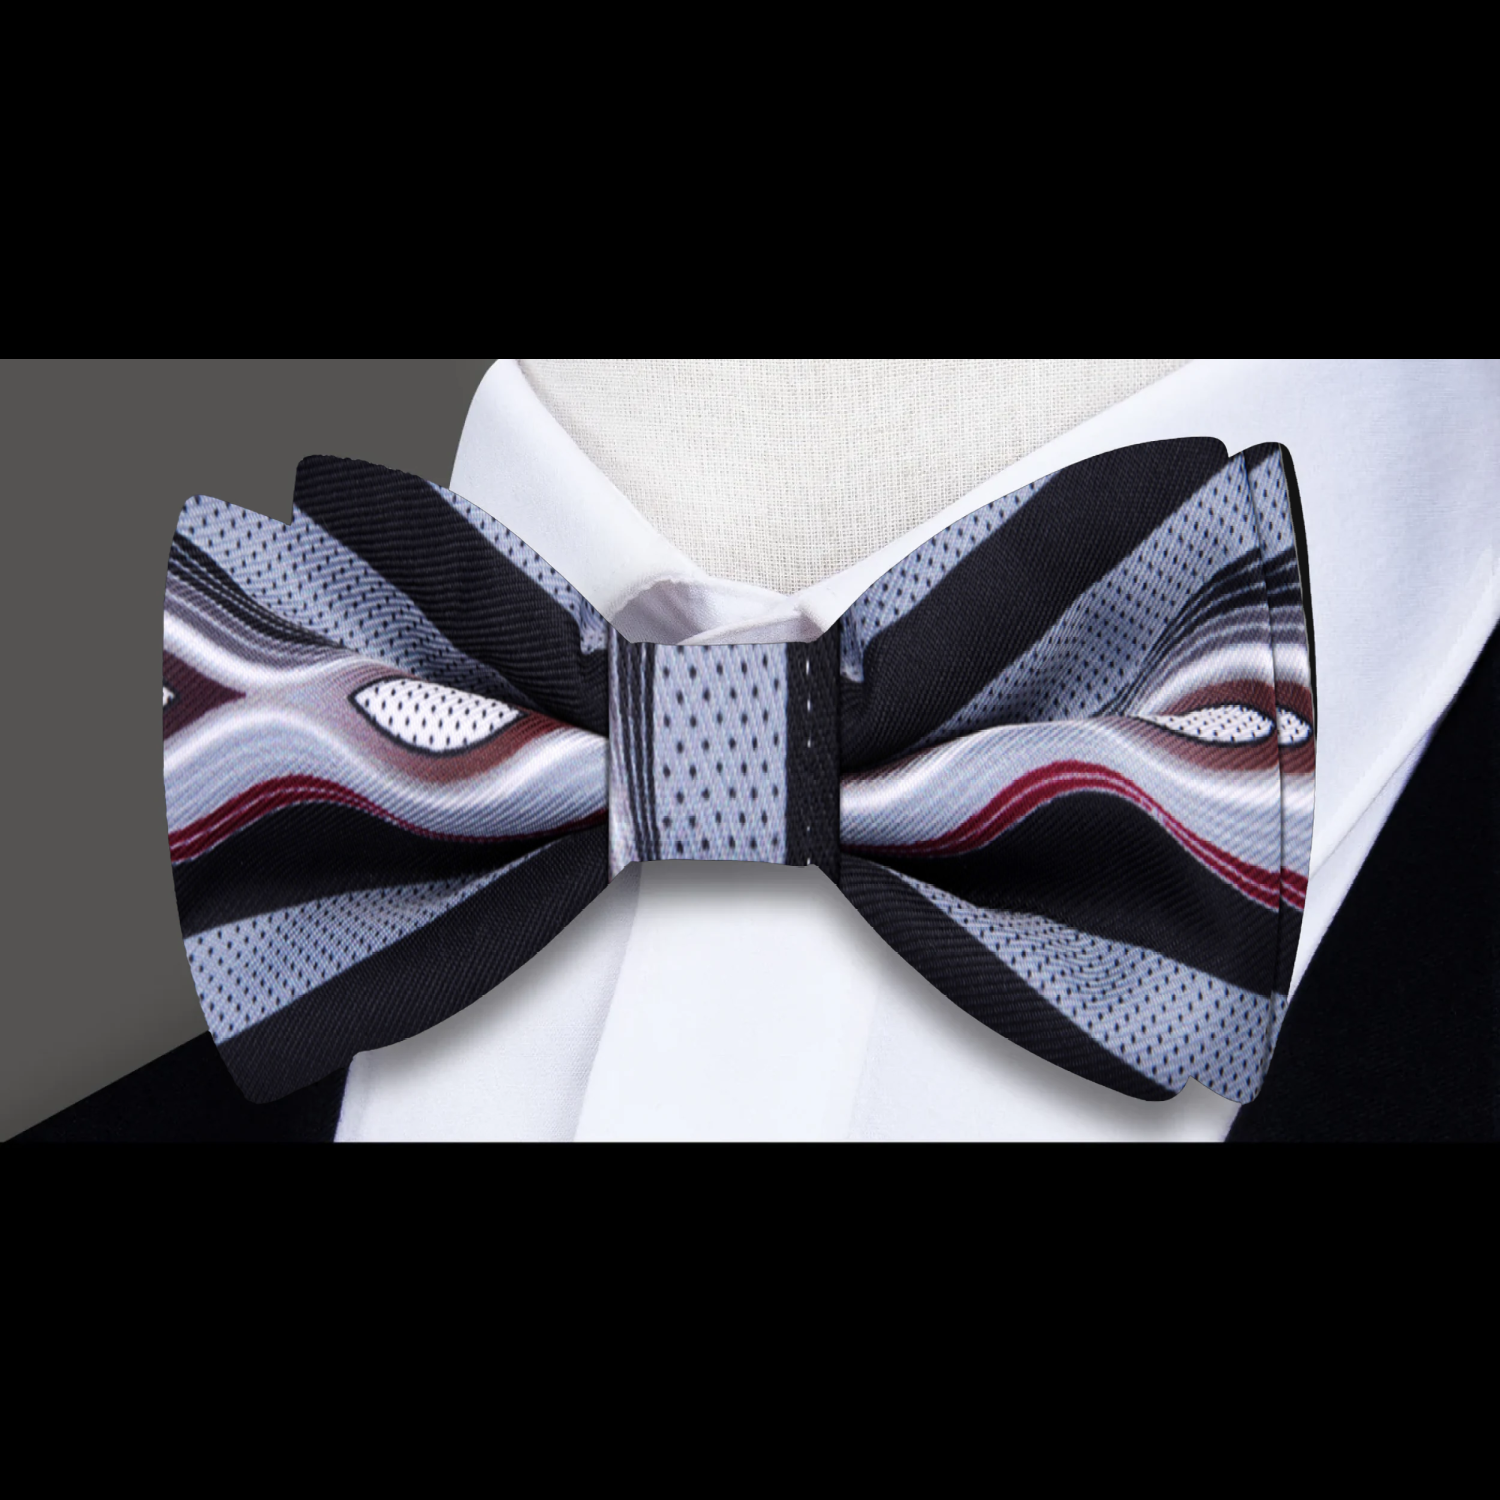 Fog Grey, Black, Deep Red Abstract Bow Tie